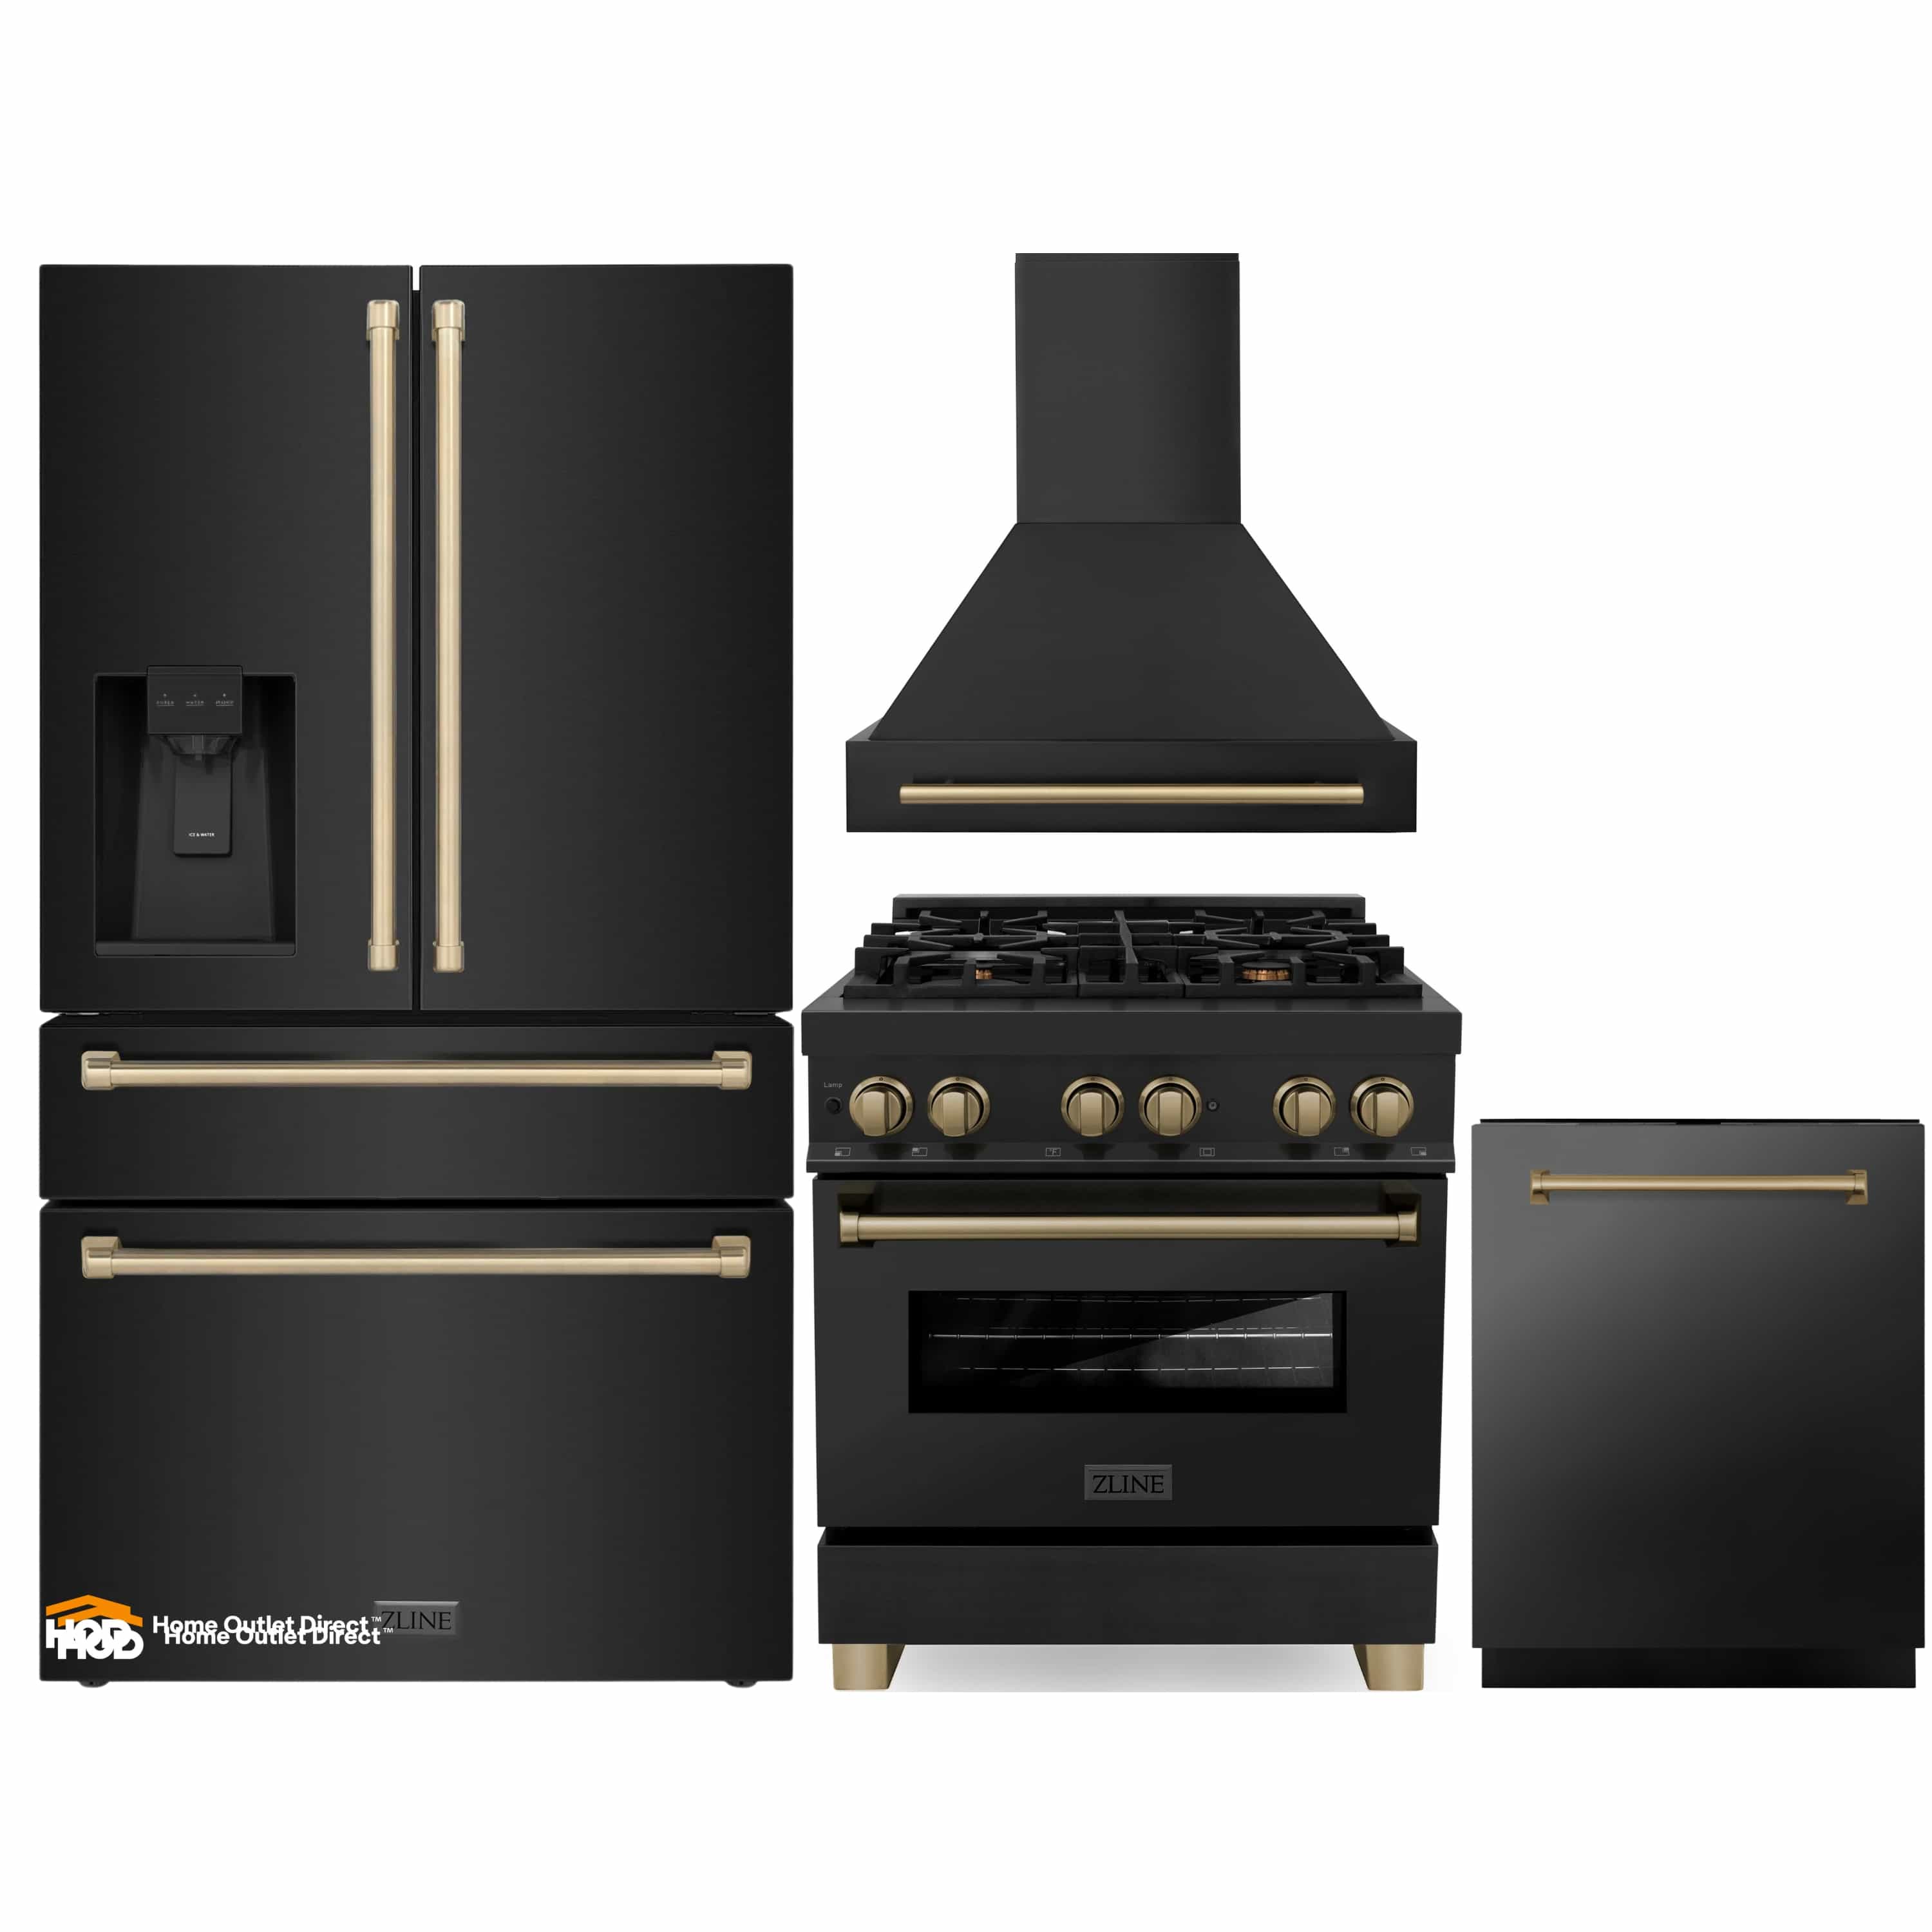 ZLINE Autograph Edition 4-Piece Appliance Package - 30-Inch Dual Fuel Range, Refrigerator with Water Dispenser, Wall Mounted Range Hood, & 24-Inch Tall Tub Dishwasher in Black Stainless Steel with Champagne Bronze Trim (4KAPR-RABRHDWV30-CB)